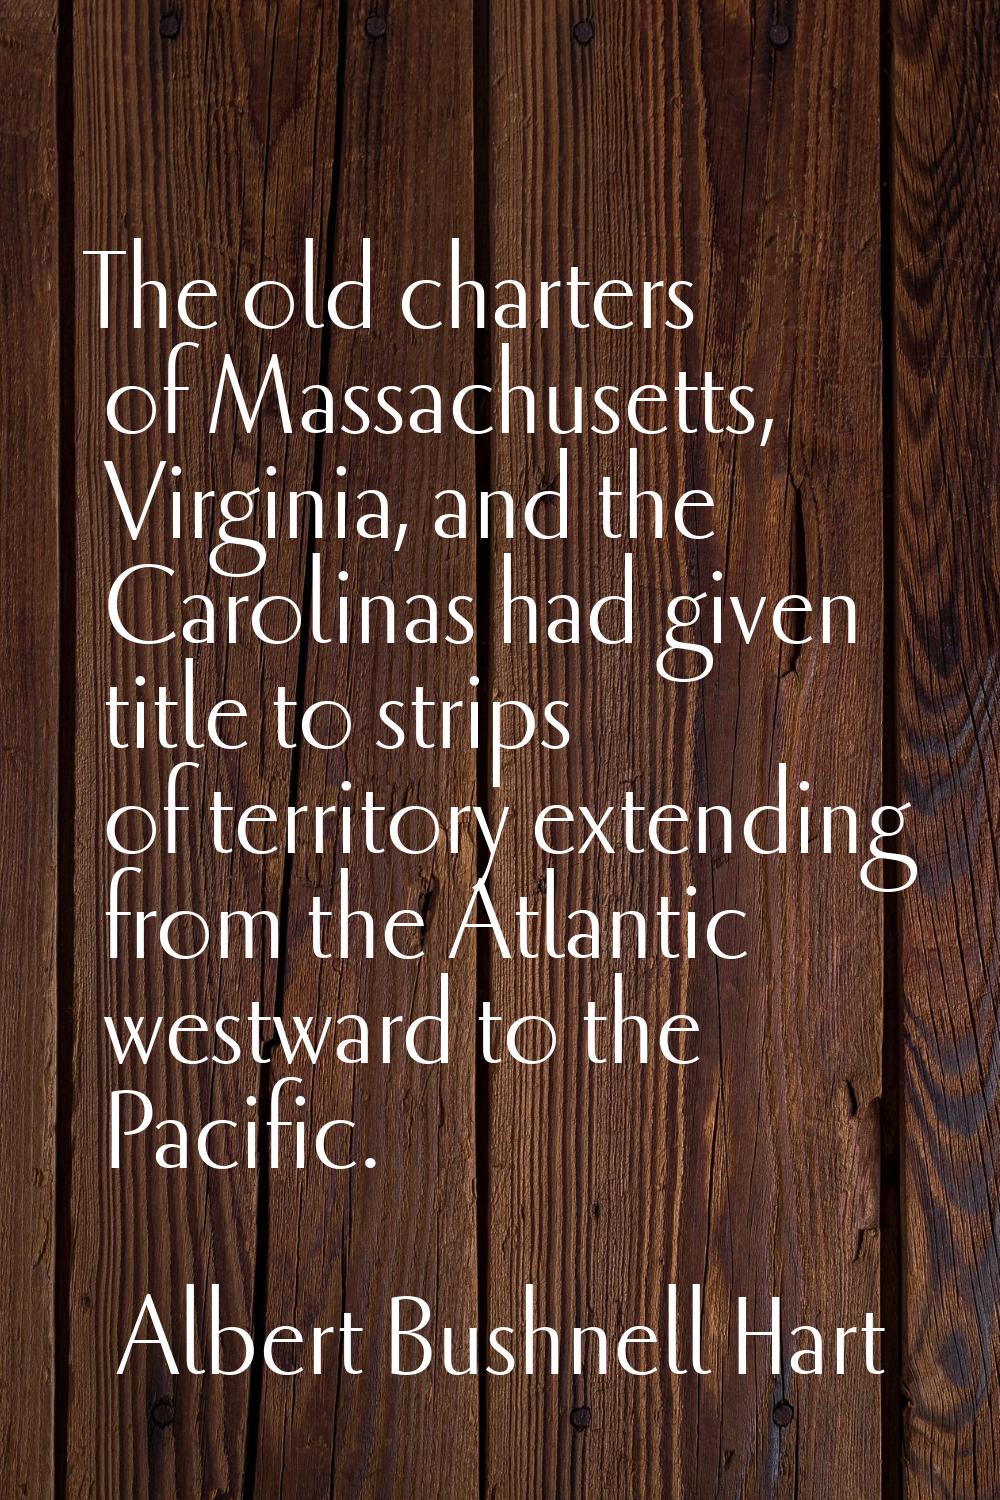 The old charters of Massachusetts, Virginia, and the Carolinas had given title to strips of territo